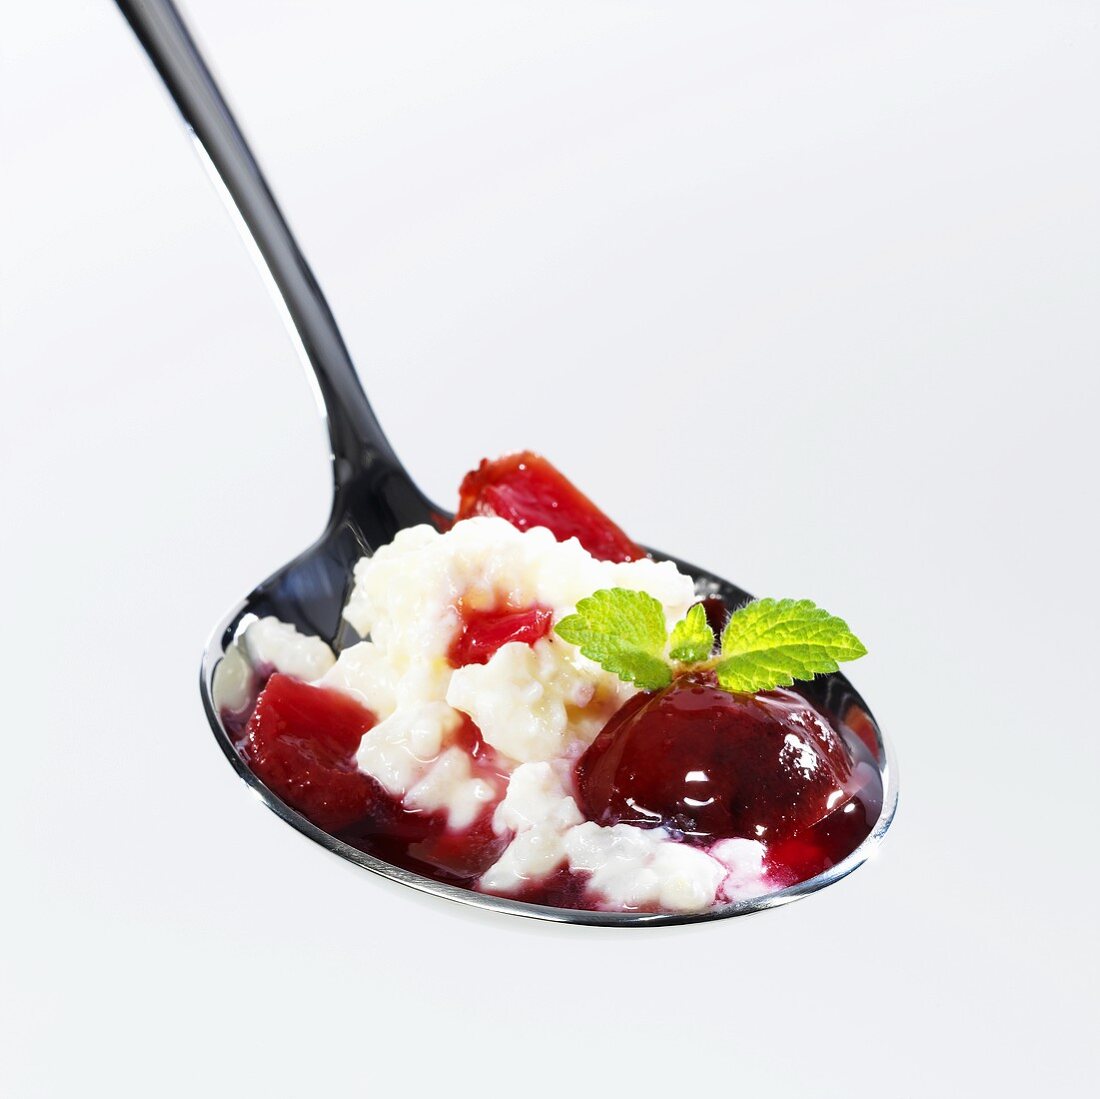 Rice pudding with plum compote on spoon